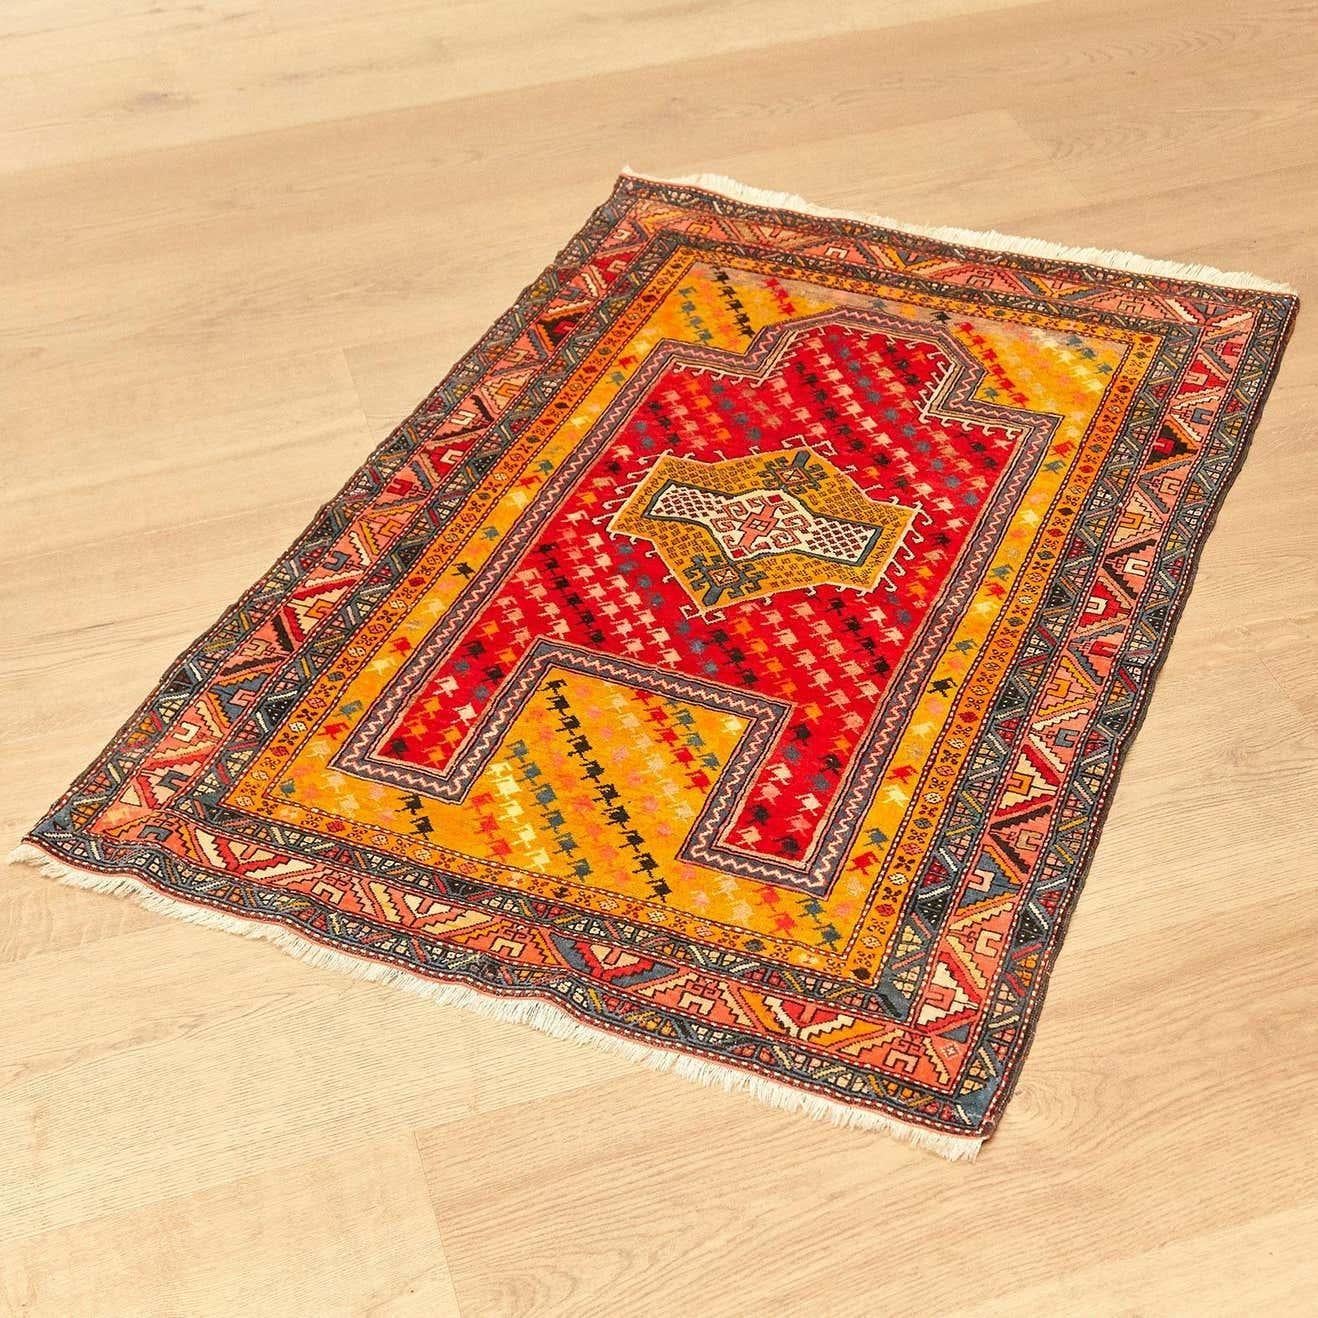 Caucas Shirvan antic wool rug. Measures: 100 x 143.

In original condition with minor wear consistent of age and use, preserving a beautiful patina.

